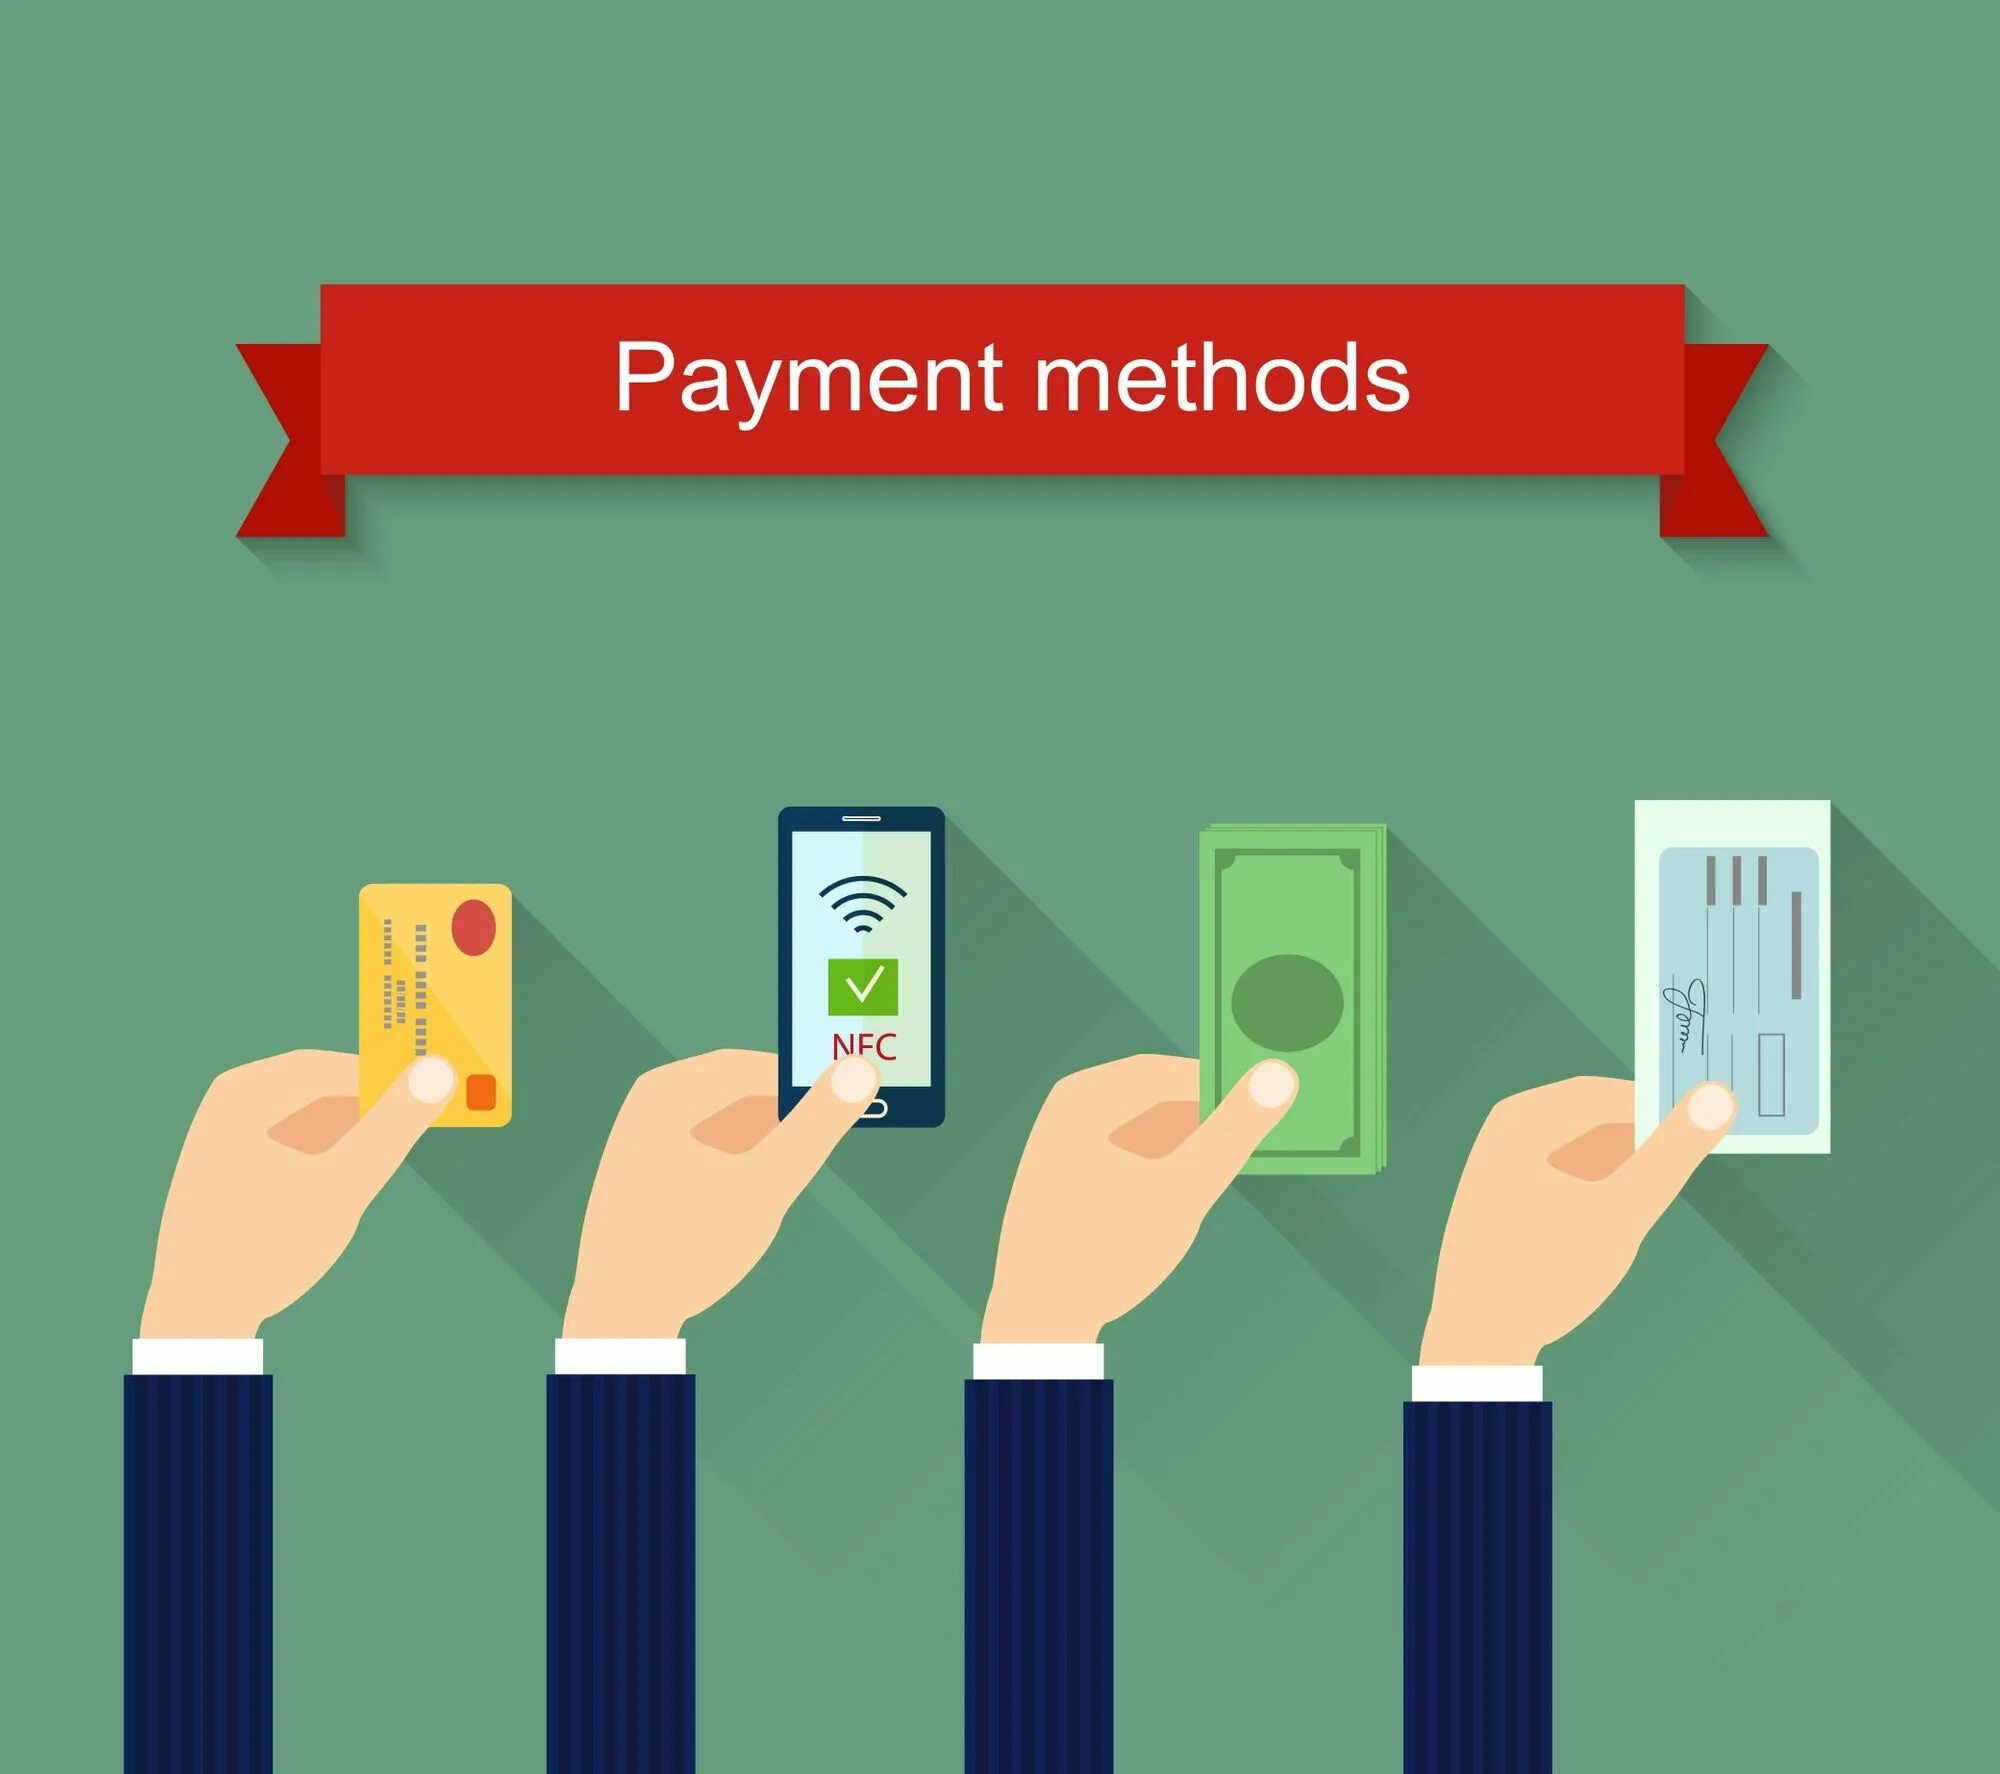 This payment method. Payment method. Pay methods. Payment methods e Commerce. Деньги из смартфона.